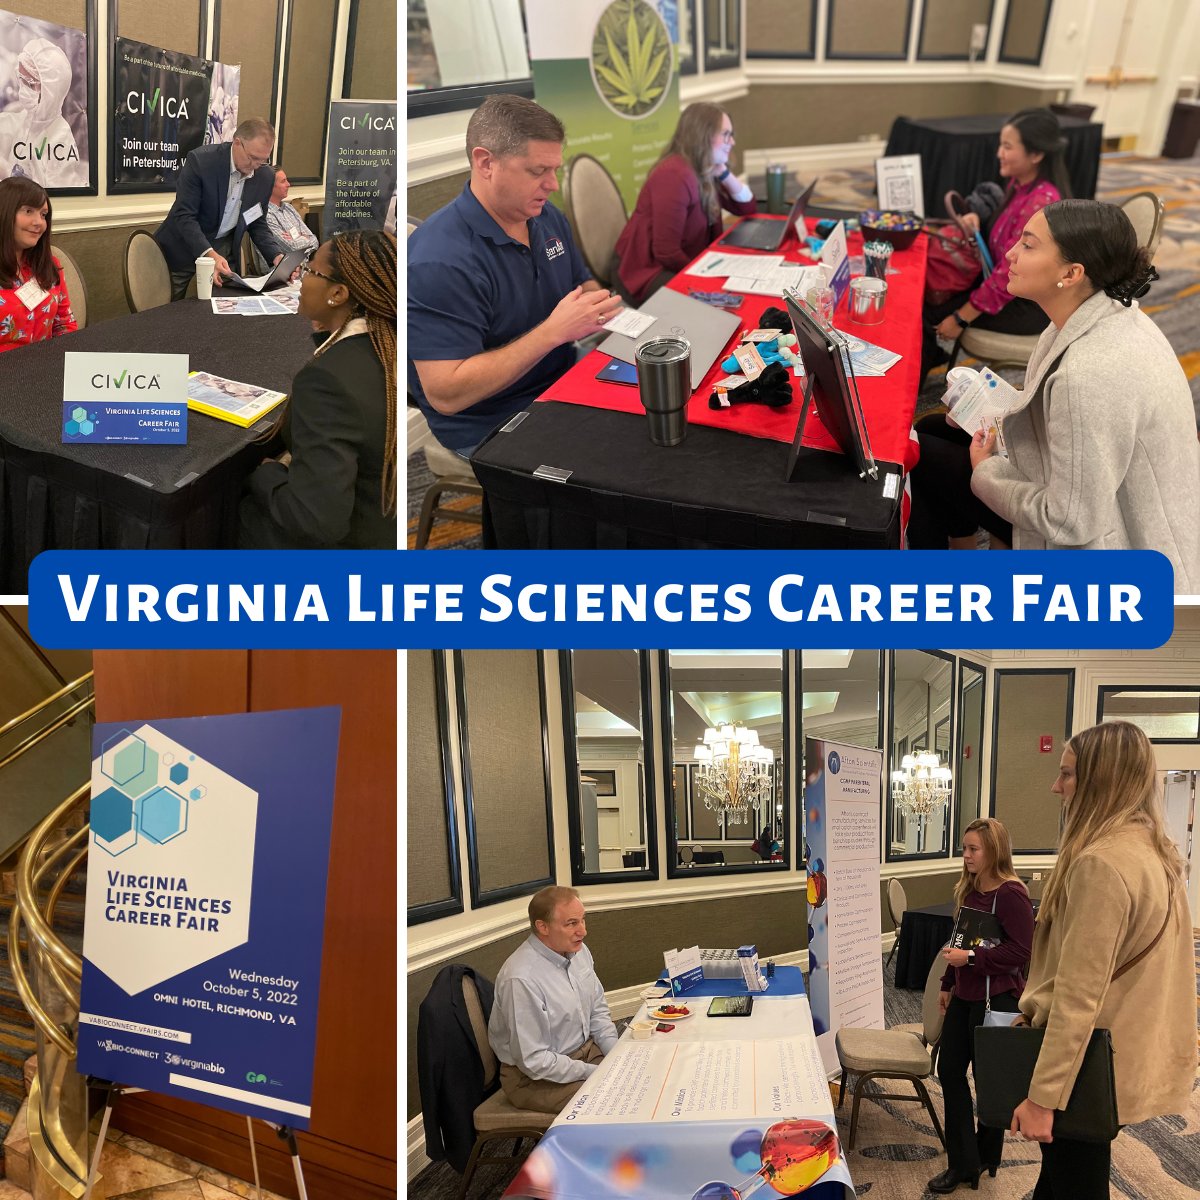 There is still time to join the Virginia #LifeSciences #CareerFair at Omni Hotel, Richmond. Come spend your lunch break with us. The atmosphere is great & we overheard some offers being extended. Or, register to join virtually at ow.ly/oyH450L2g1Y and chat with employers!